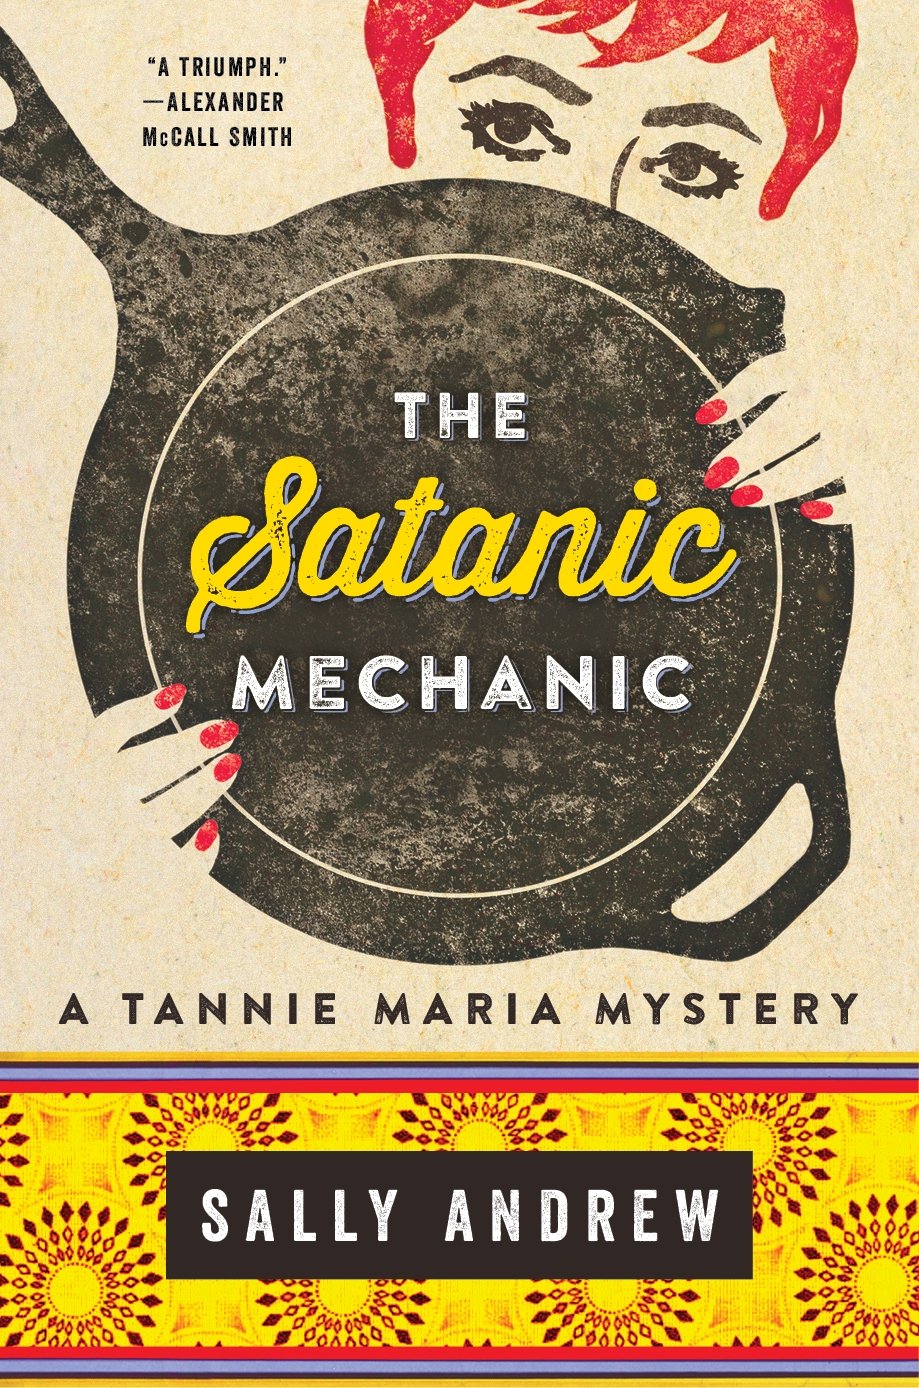 The Satanic Mechanic: A Tannie Maria Mystery 9781925355130 at Chapters bookstore Pakistan